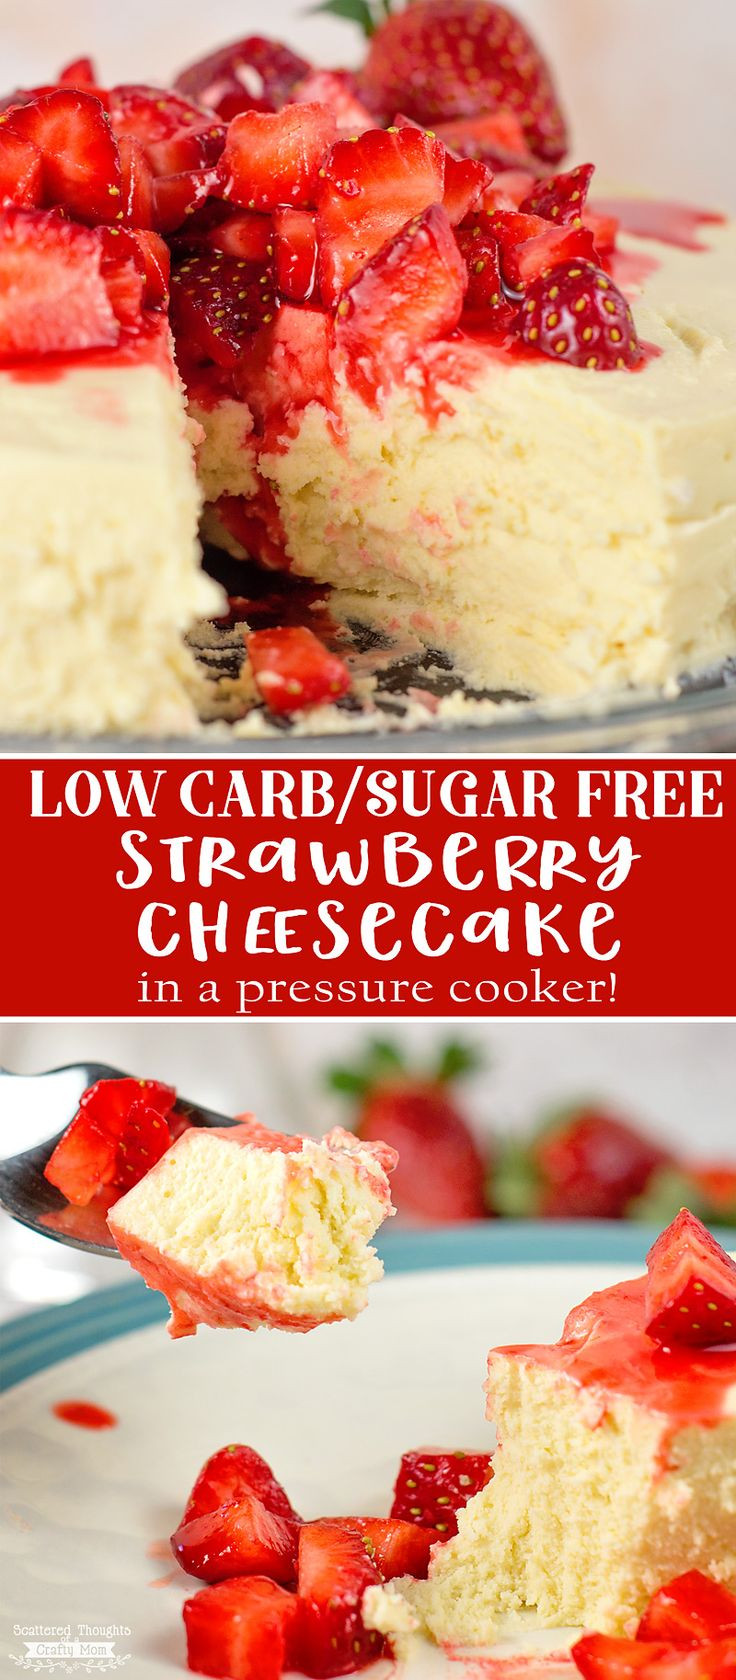 Sugar Free Low Carb Desserts For Diabetics
 Low Carb Sugar free Crustless Cheesecake in the